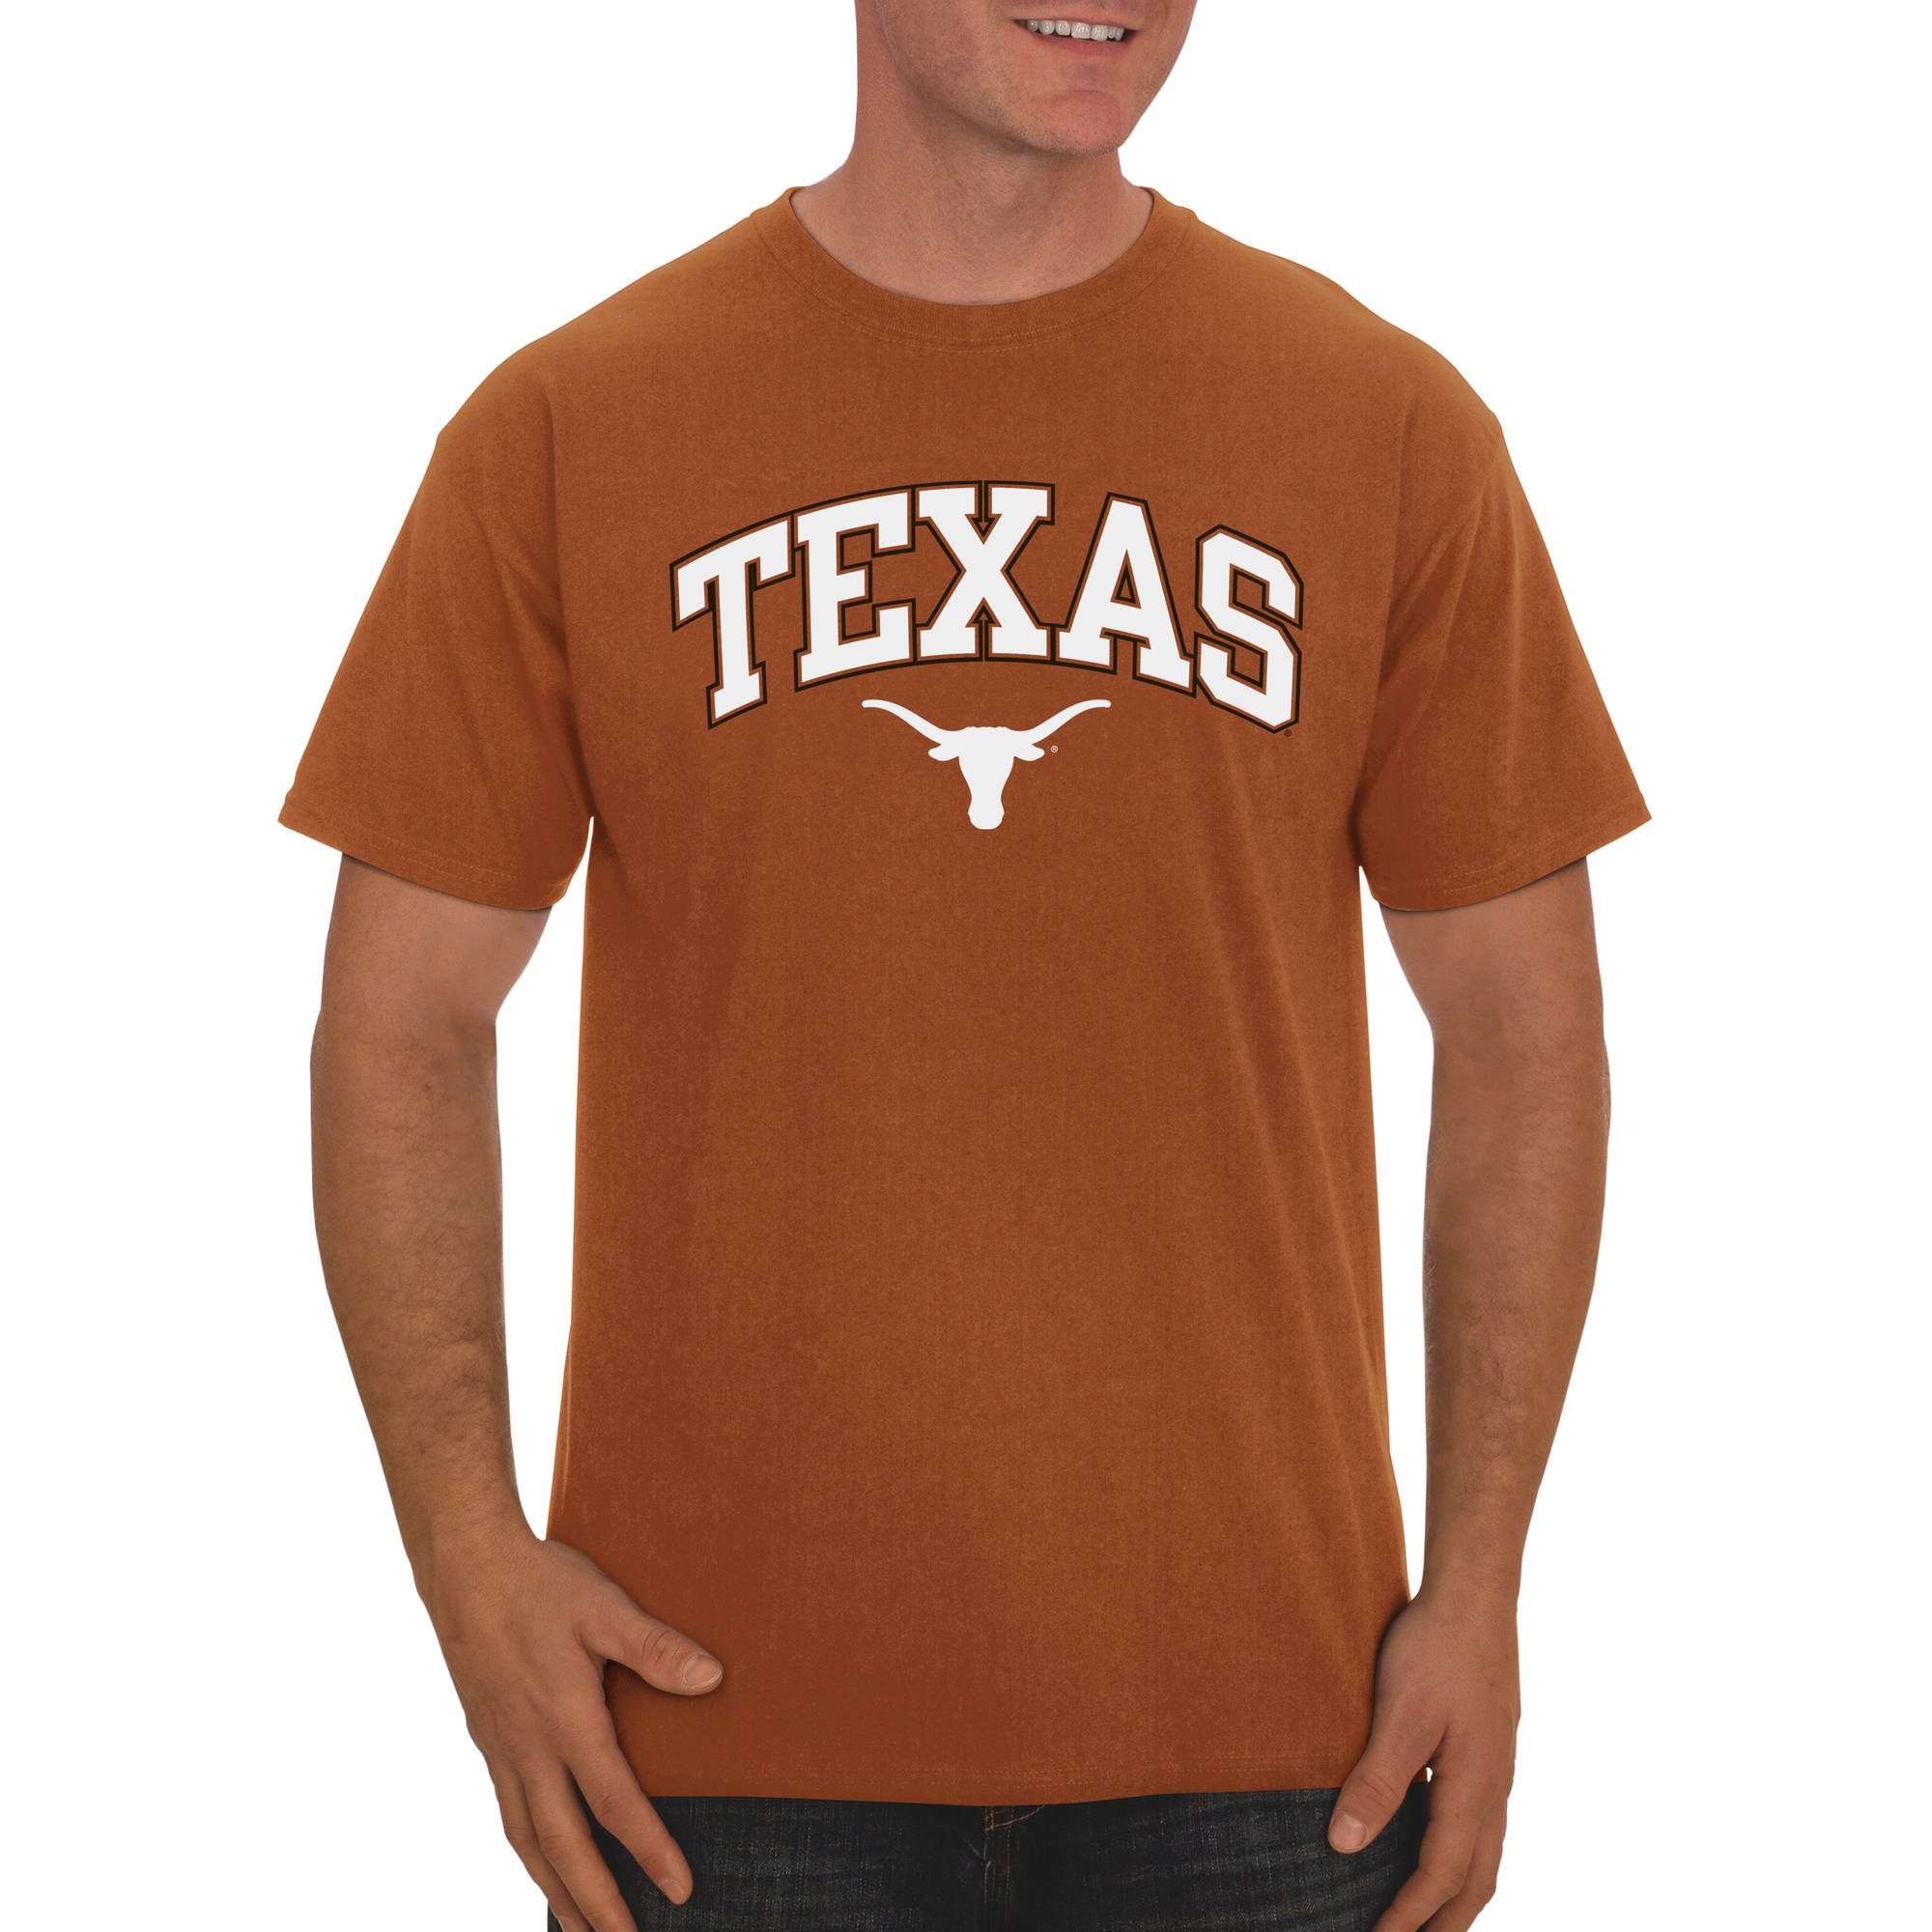 Russell NCAA Texas Longhorns, Men's Classic Cotton T-Shirt - image 1 of 1